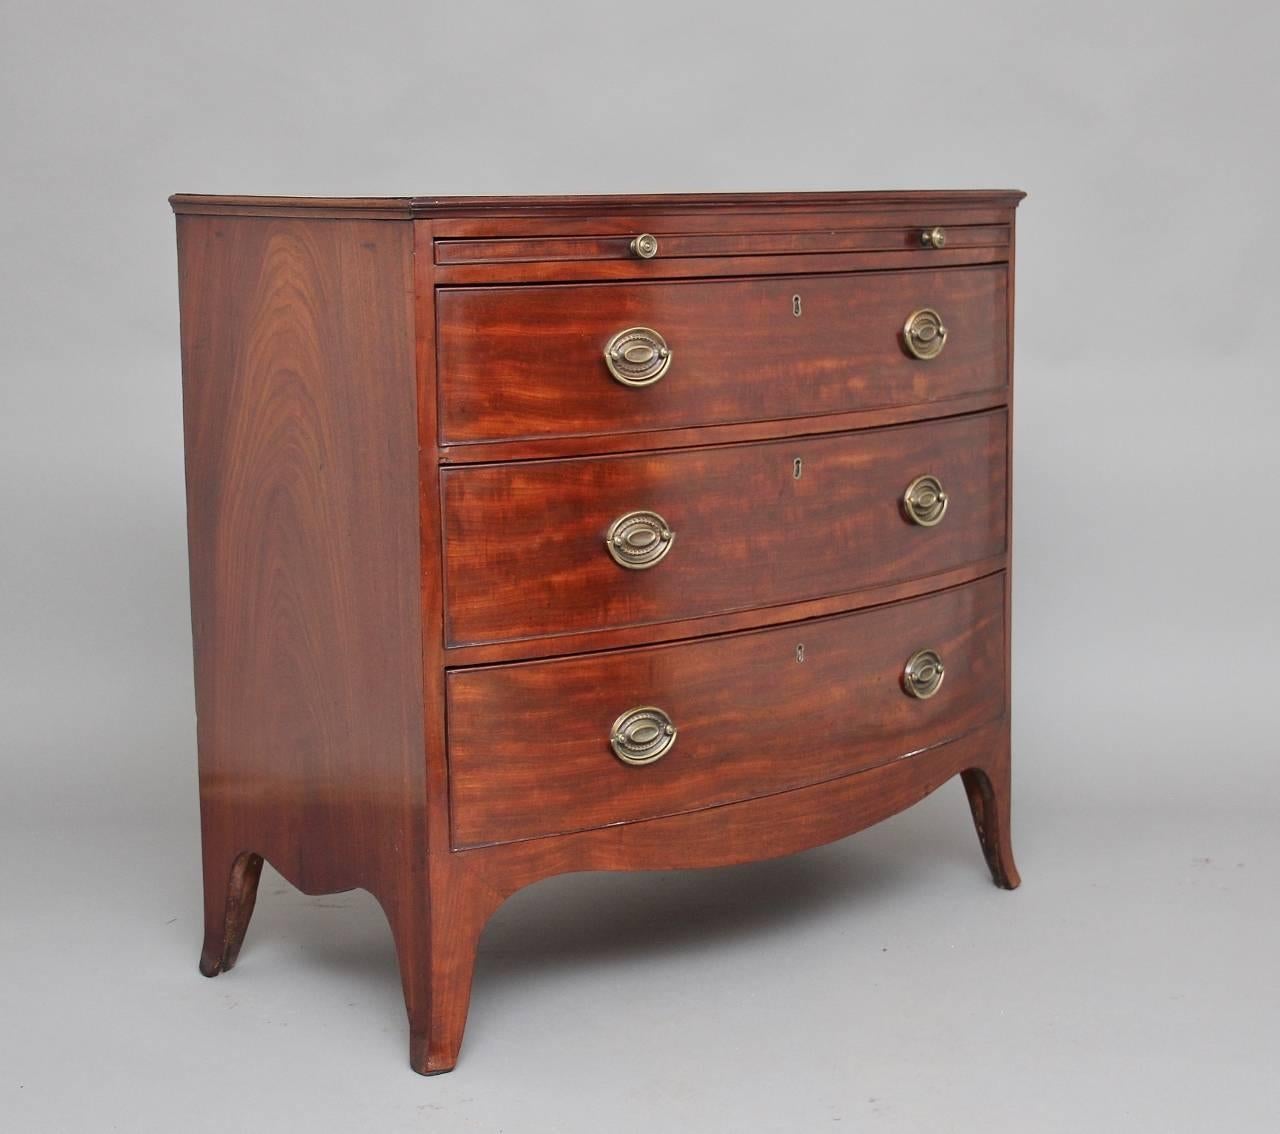 Early 19th century mahogany bowfront chest of drawers, the moulded edge top having a brushing slide below and three graduated oak lined drawers with oval brass handles, with a shaped apron along the sides and front standing on splay feet, circa 1800.